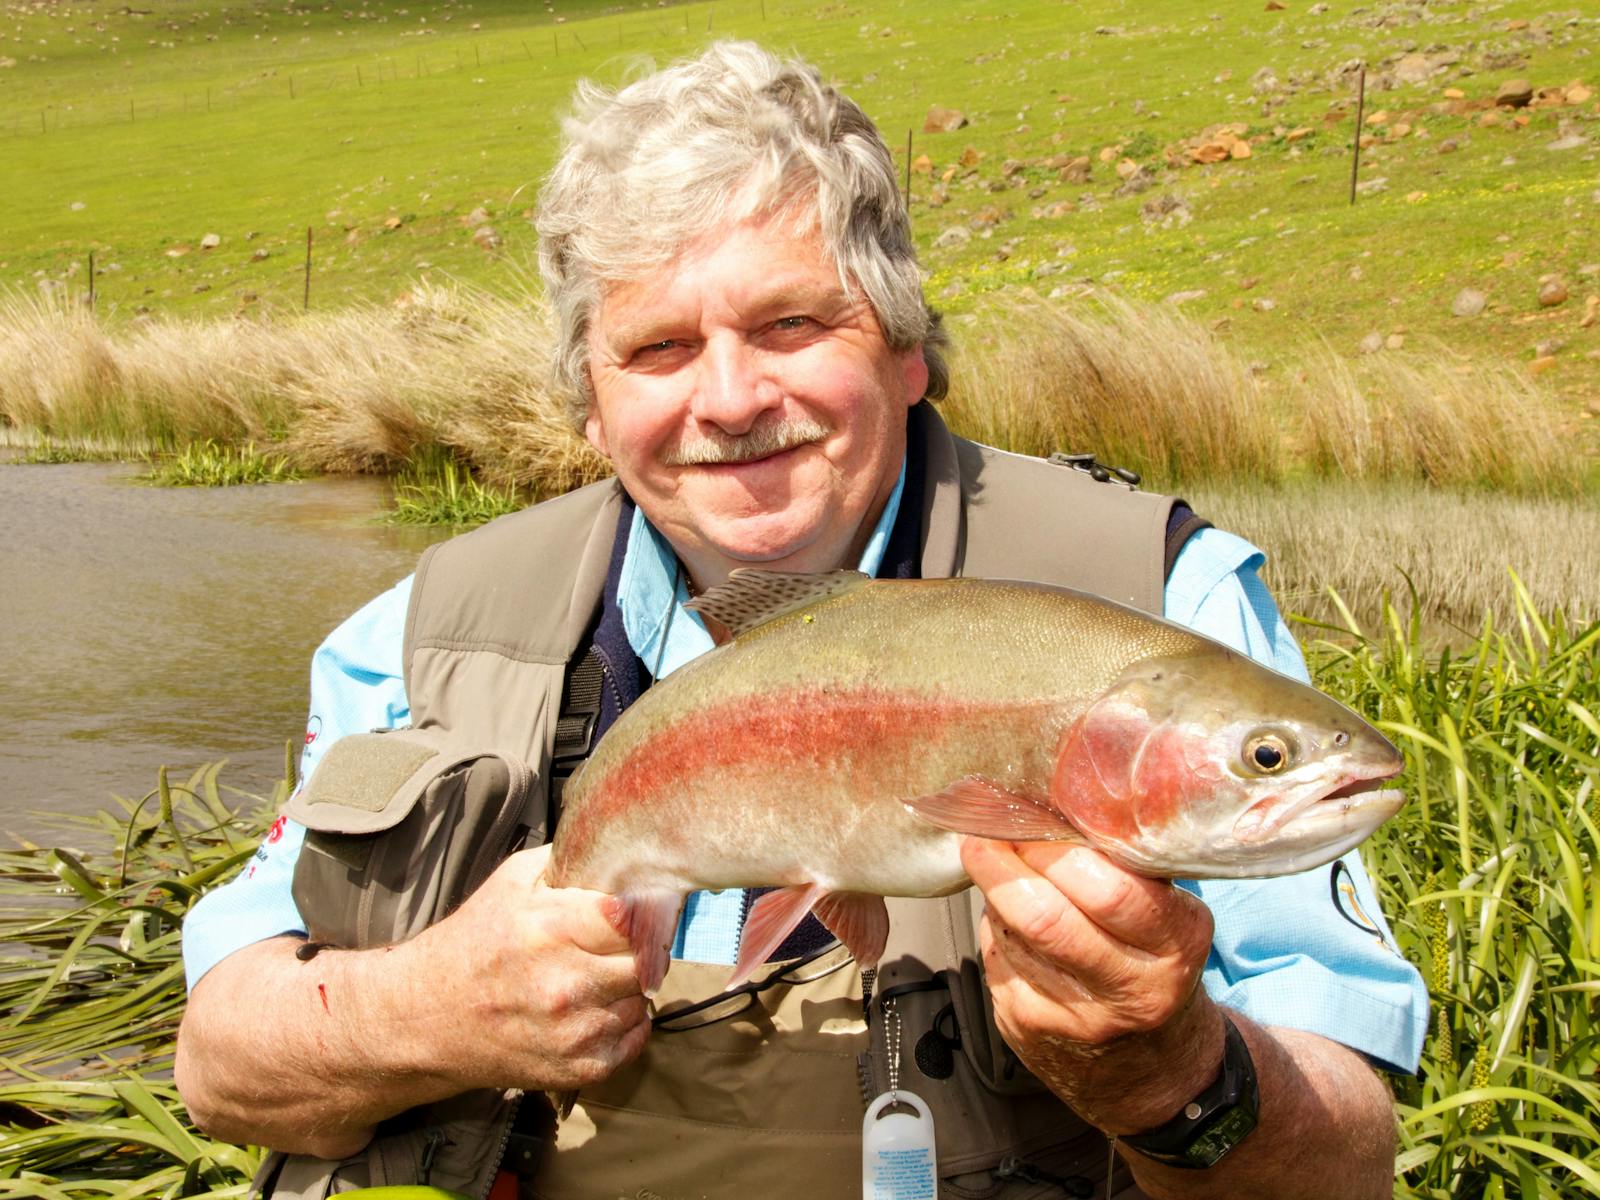 We can organise guided fly fishing days to enhance your fishing skills!